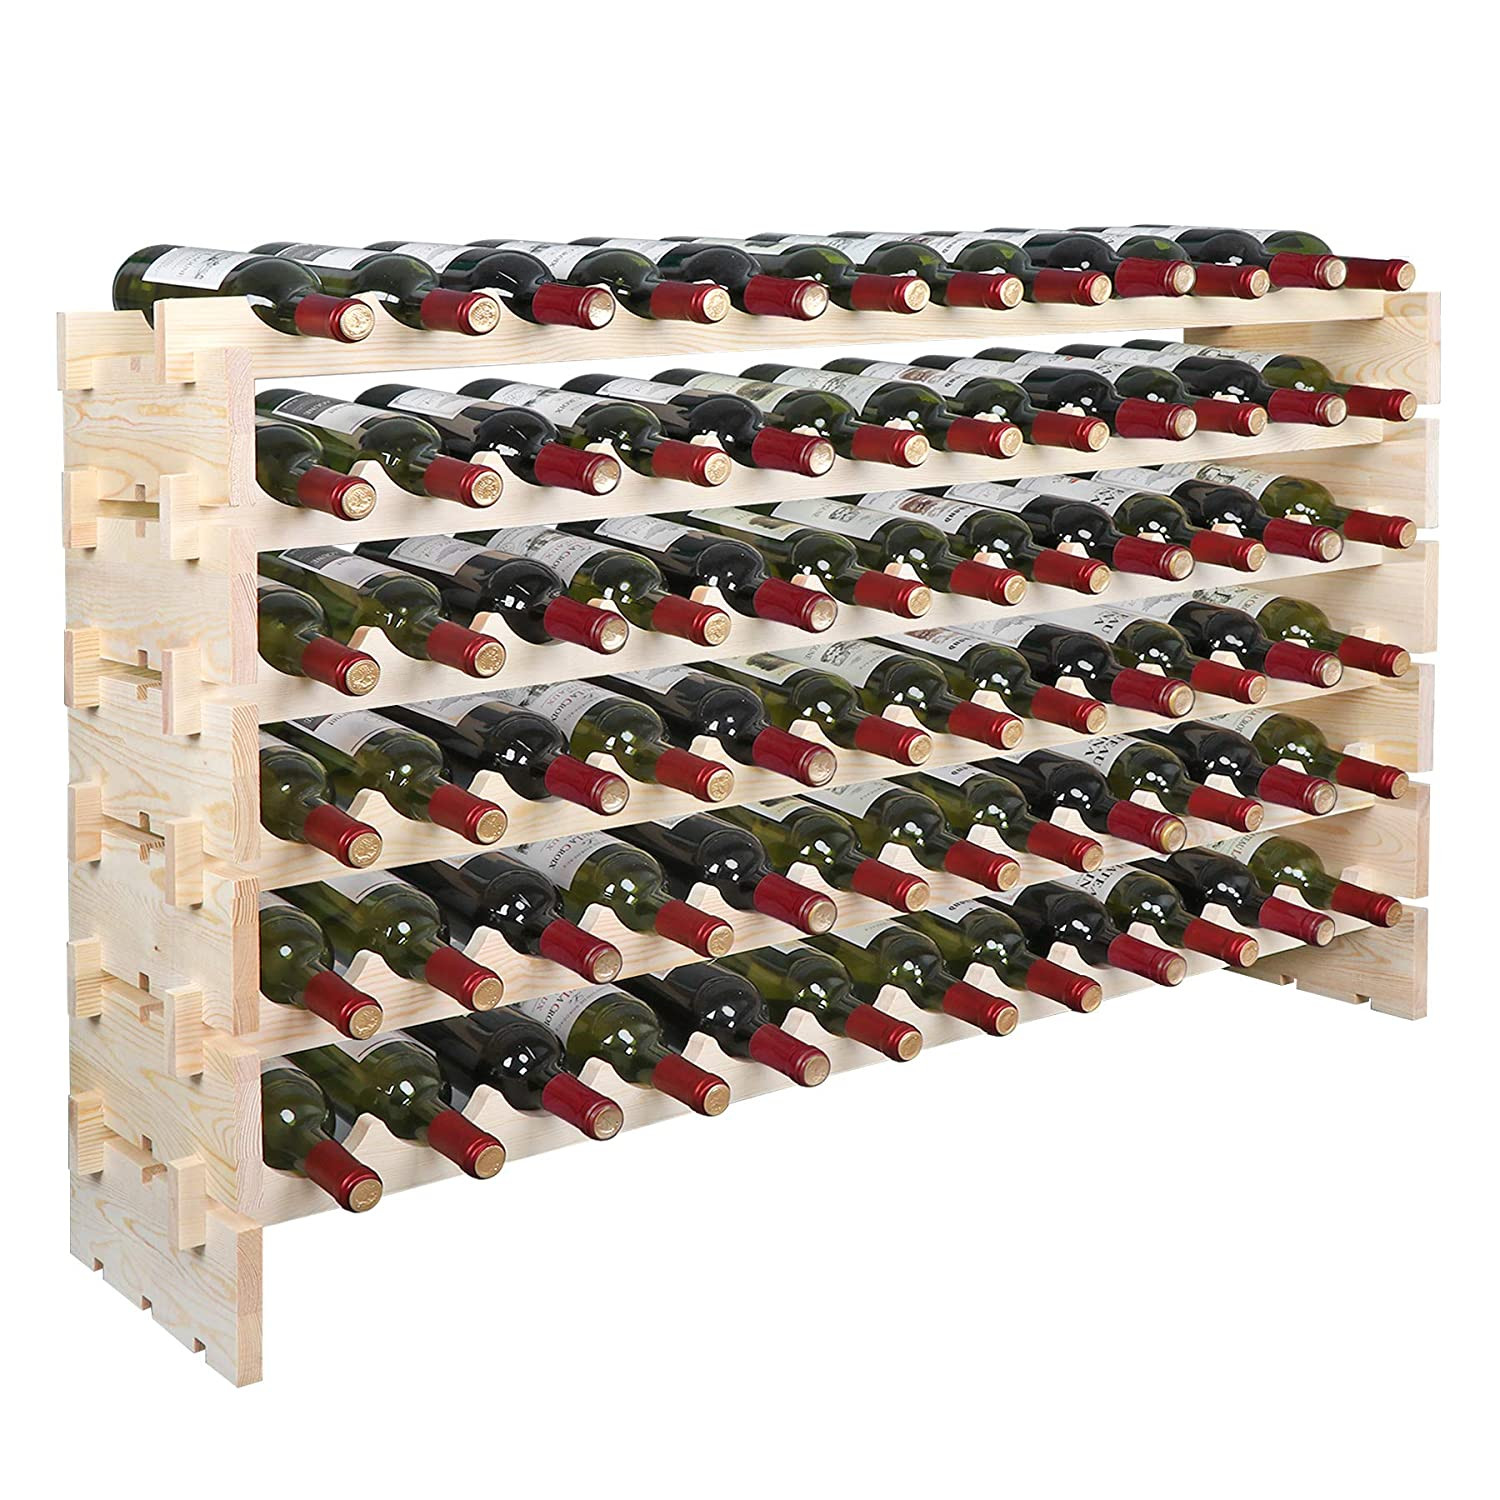 DIY Wine Cellar Rack
 Best diy wine cellar rack The Best Home